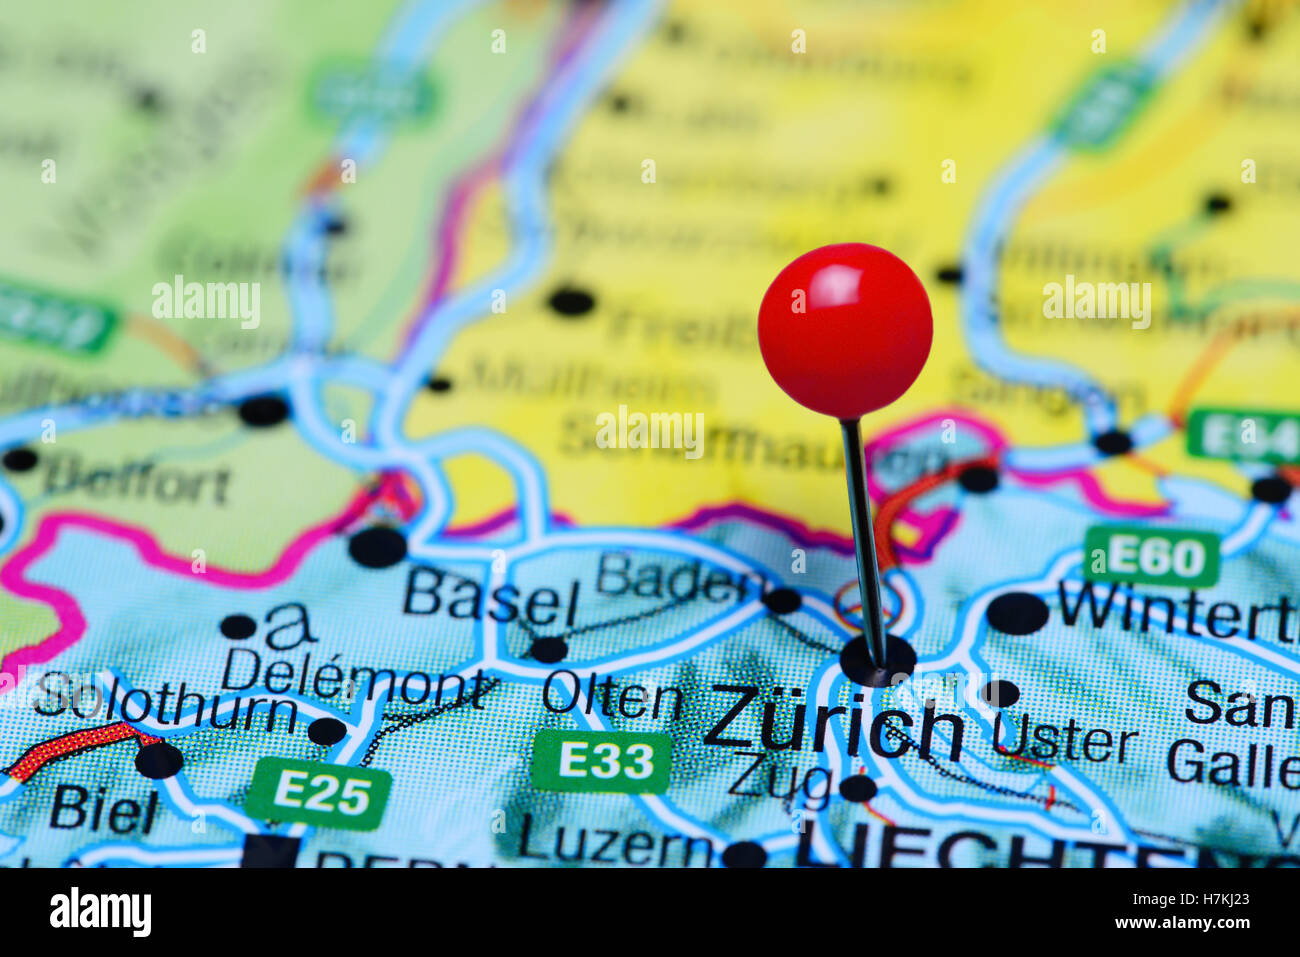 Zurich pinned on a map of Switzerland Stock Photo